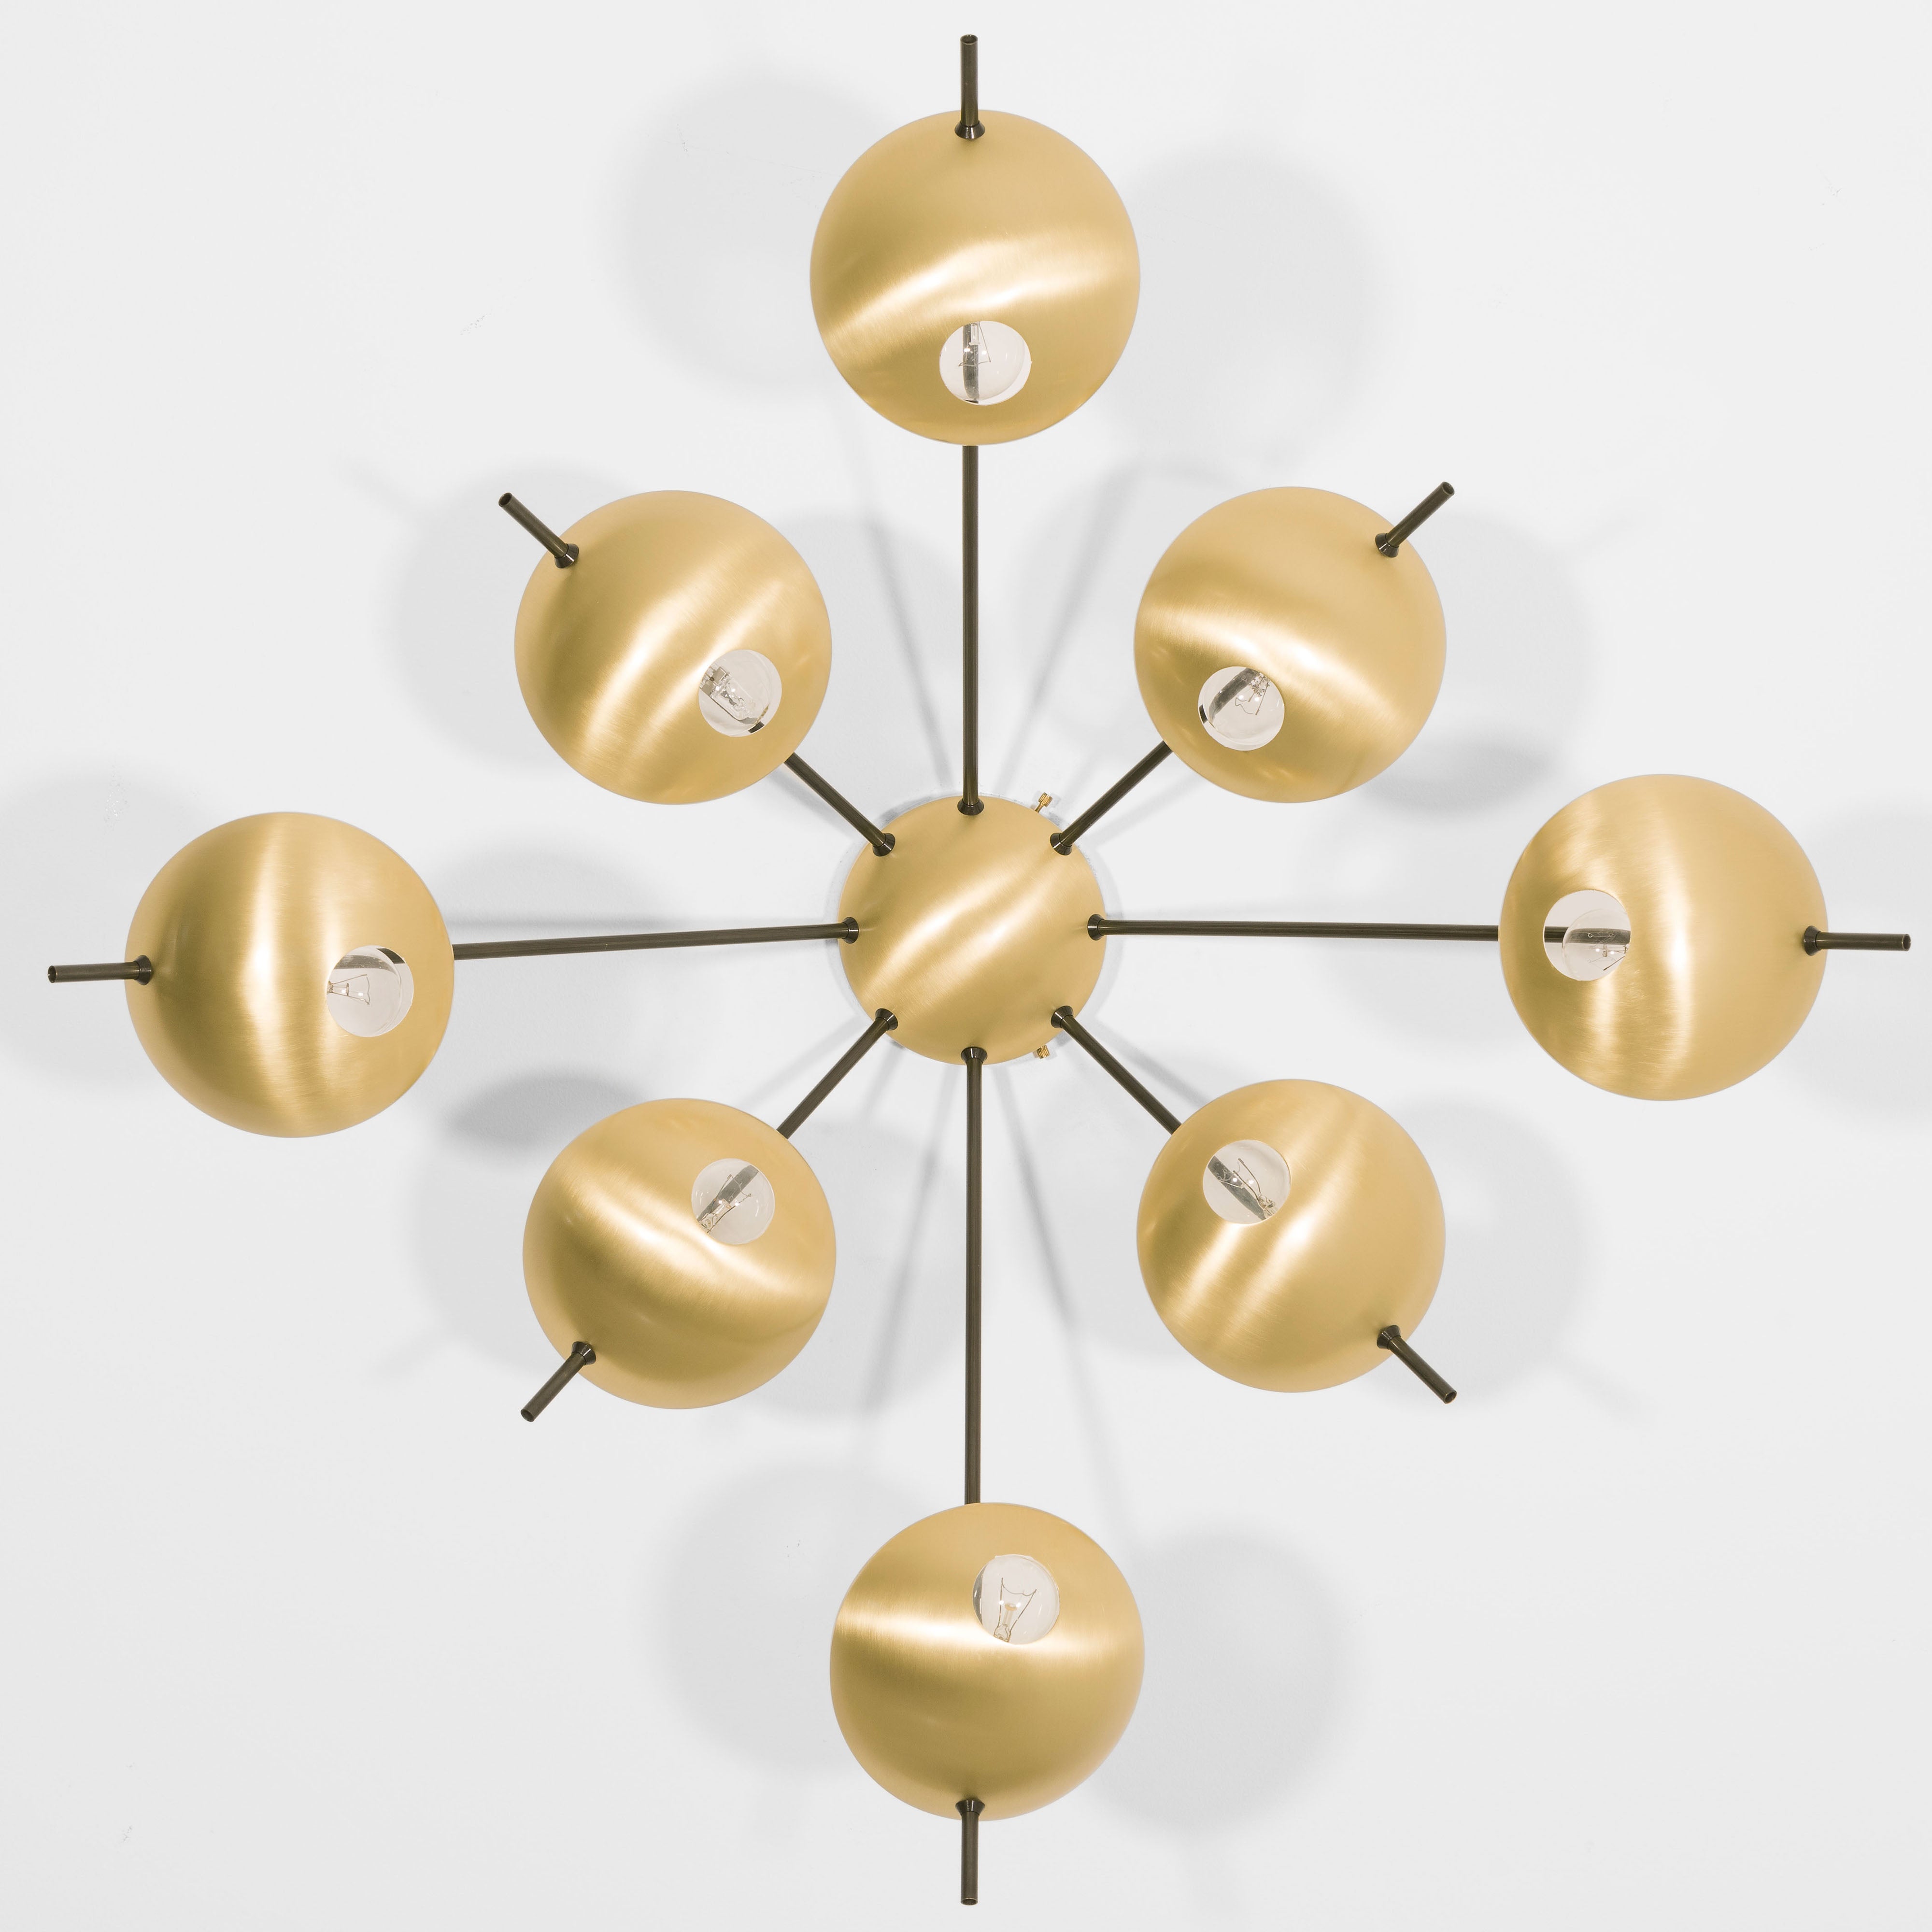 Octo II, with its elements and its shapes simplicity and with its light and shadow effects, represents a tribute to sundials, ancient solar clocks. From a brass core, 8 thin arms branch off, lightly supporting 8 painted brass plates. Octo II becomes a point of light and color in any home interiors, an element of creative and colored decoration.